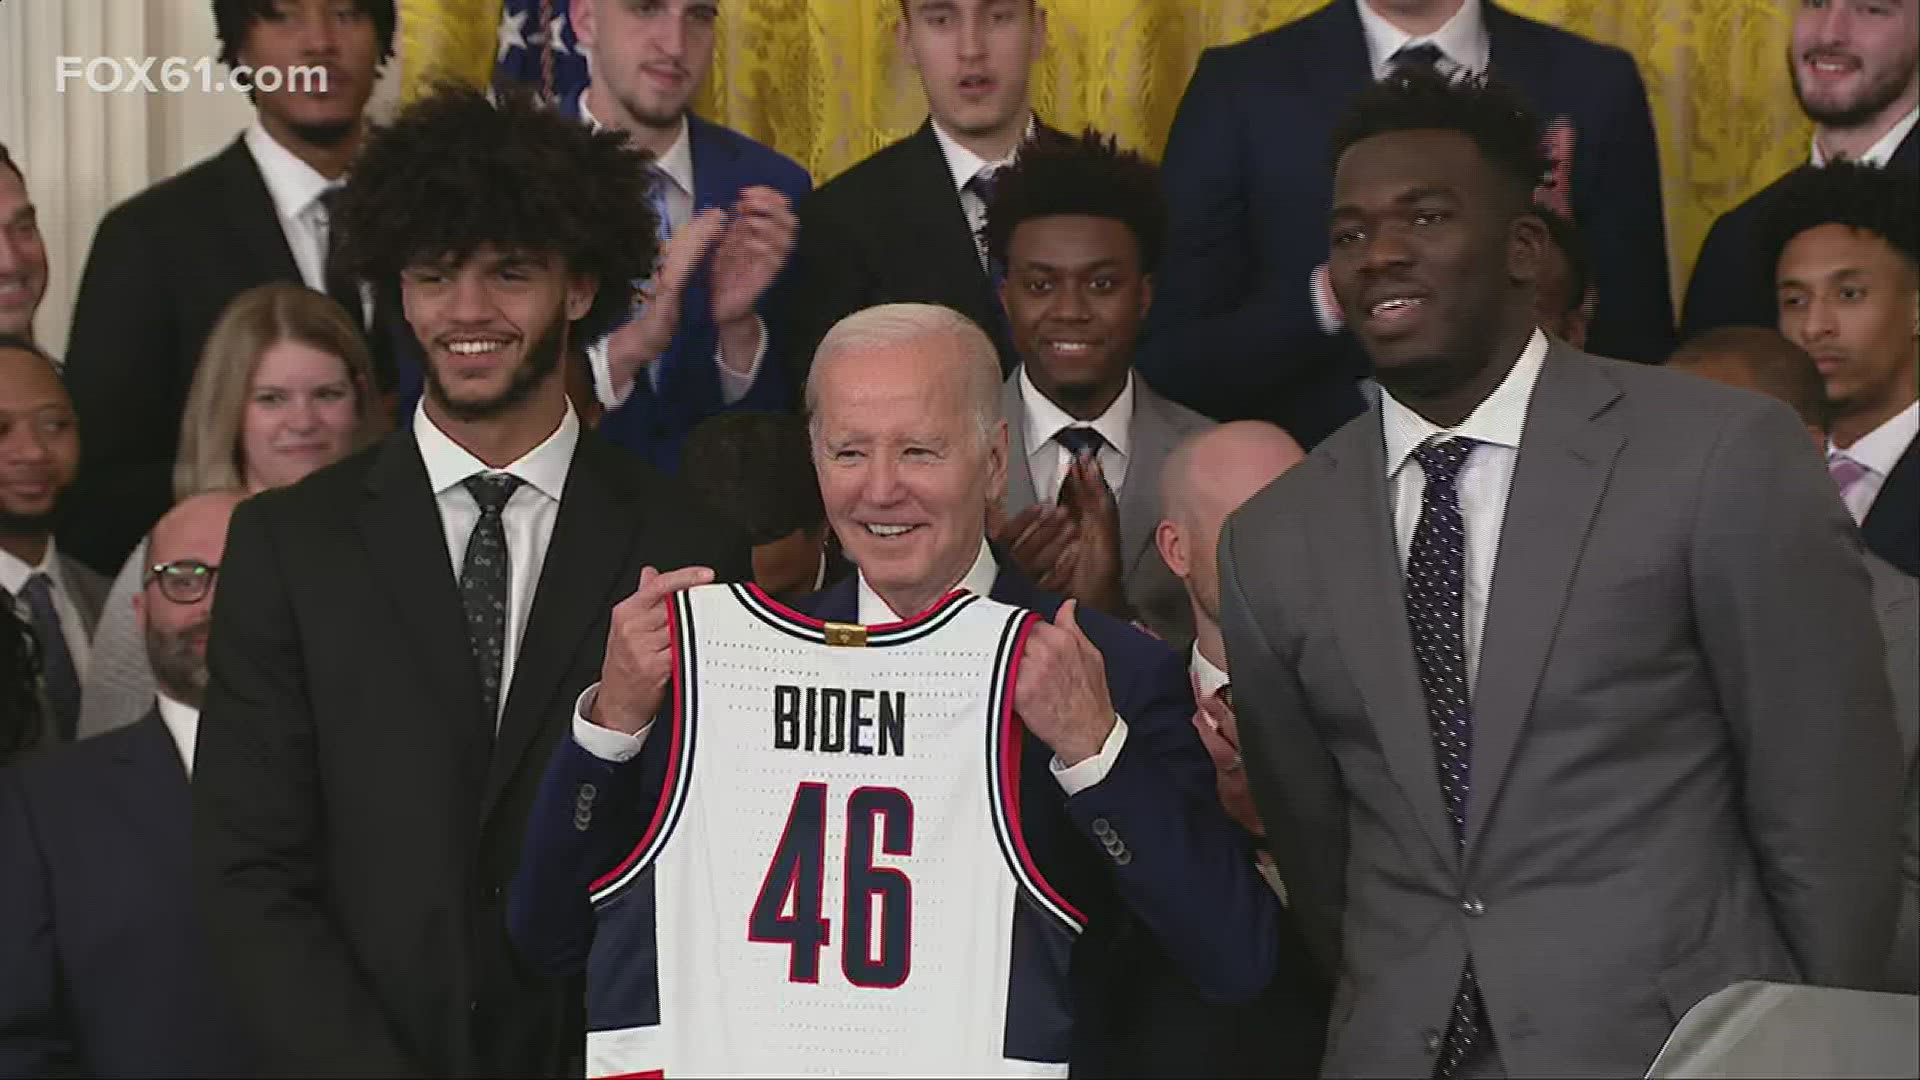 The LSU Tigers and UConn Huskies were both honored at the White House on Friday for winning the national championship.